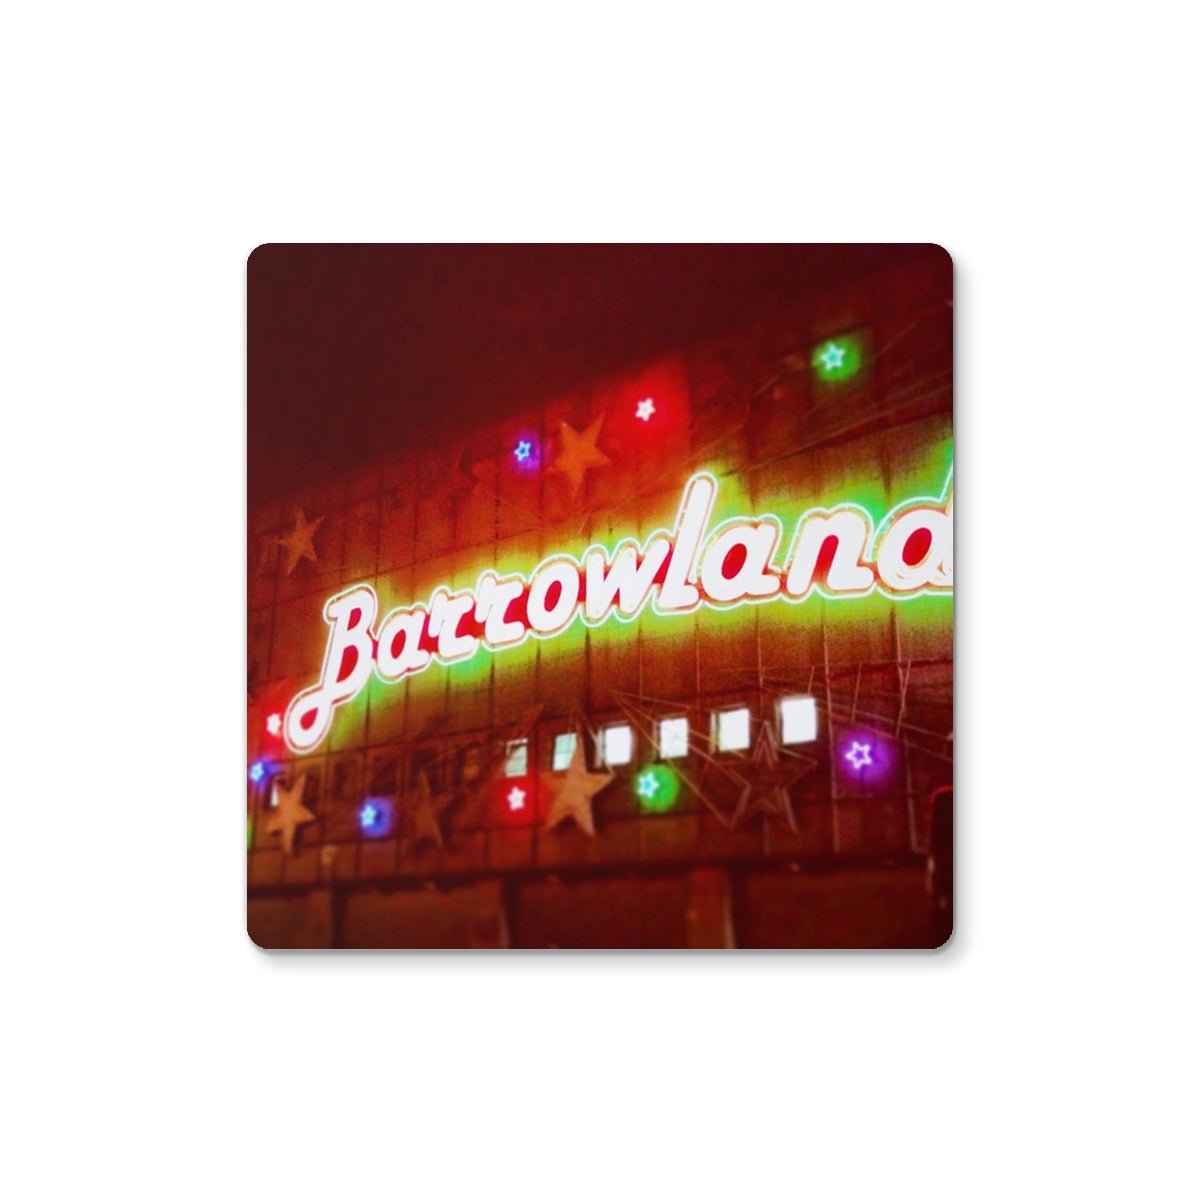 A Neon Glasgow Barrowlands Art Gifts Coaster-Coasters-Edinburgh & Glasgow Art Gallery-4 Coasters-Paintings, Prints, Homeware, Art Gifts From Scotland By Scottish Artist Kevin Hunter